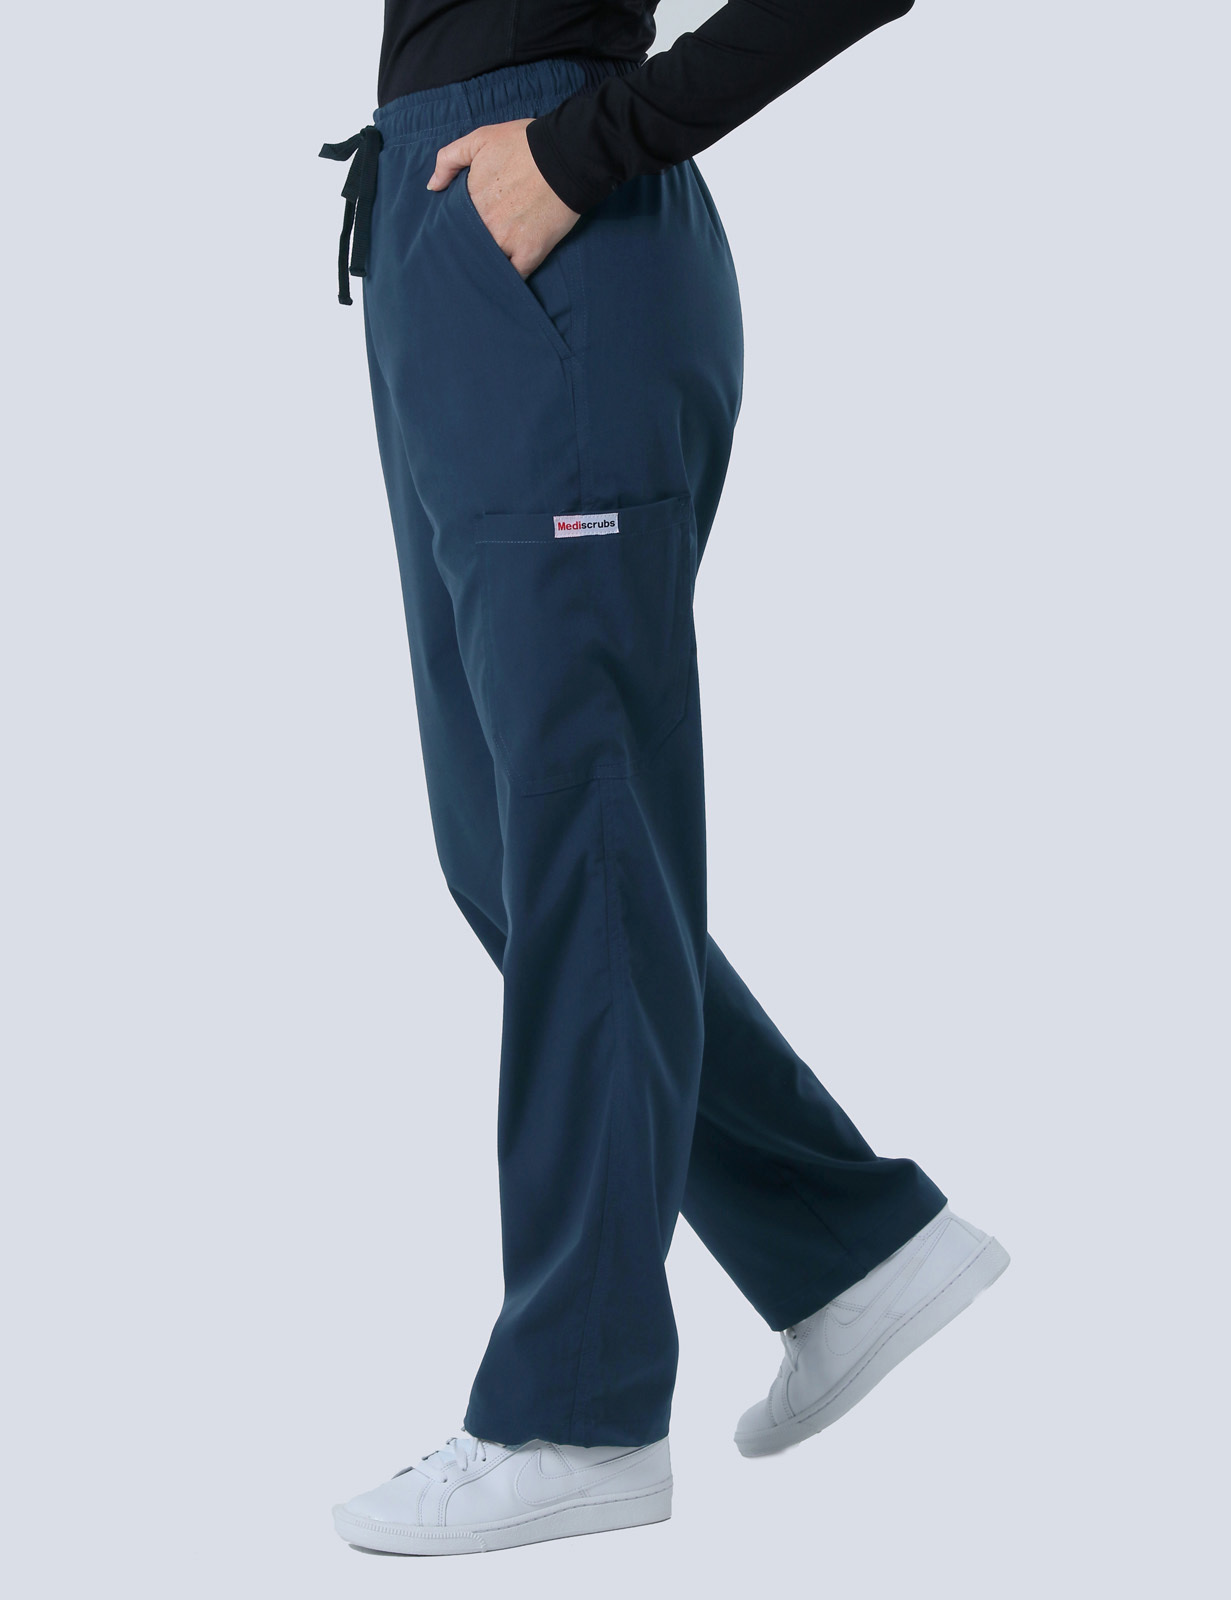 The Alfred Hospital - ICU (Women's Fit Solid Scrub Top and Cargo Pants in Navy incl Logos)